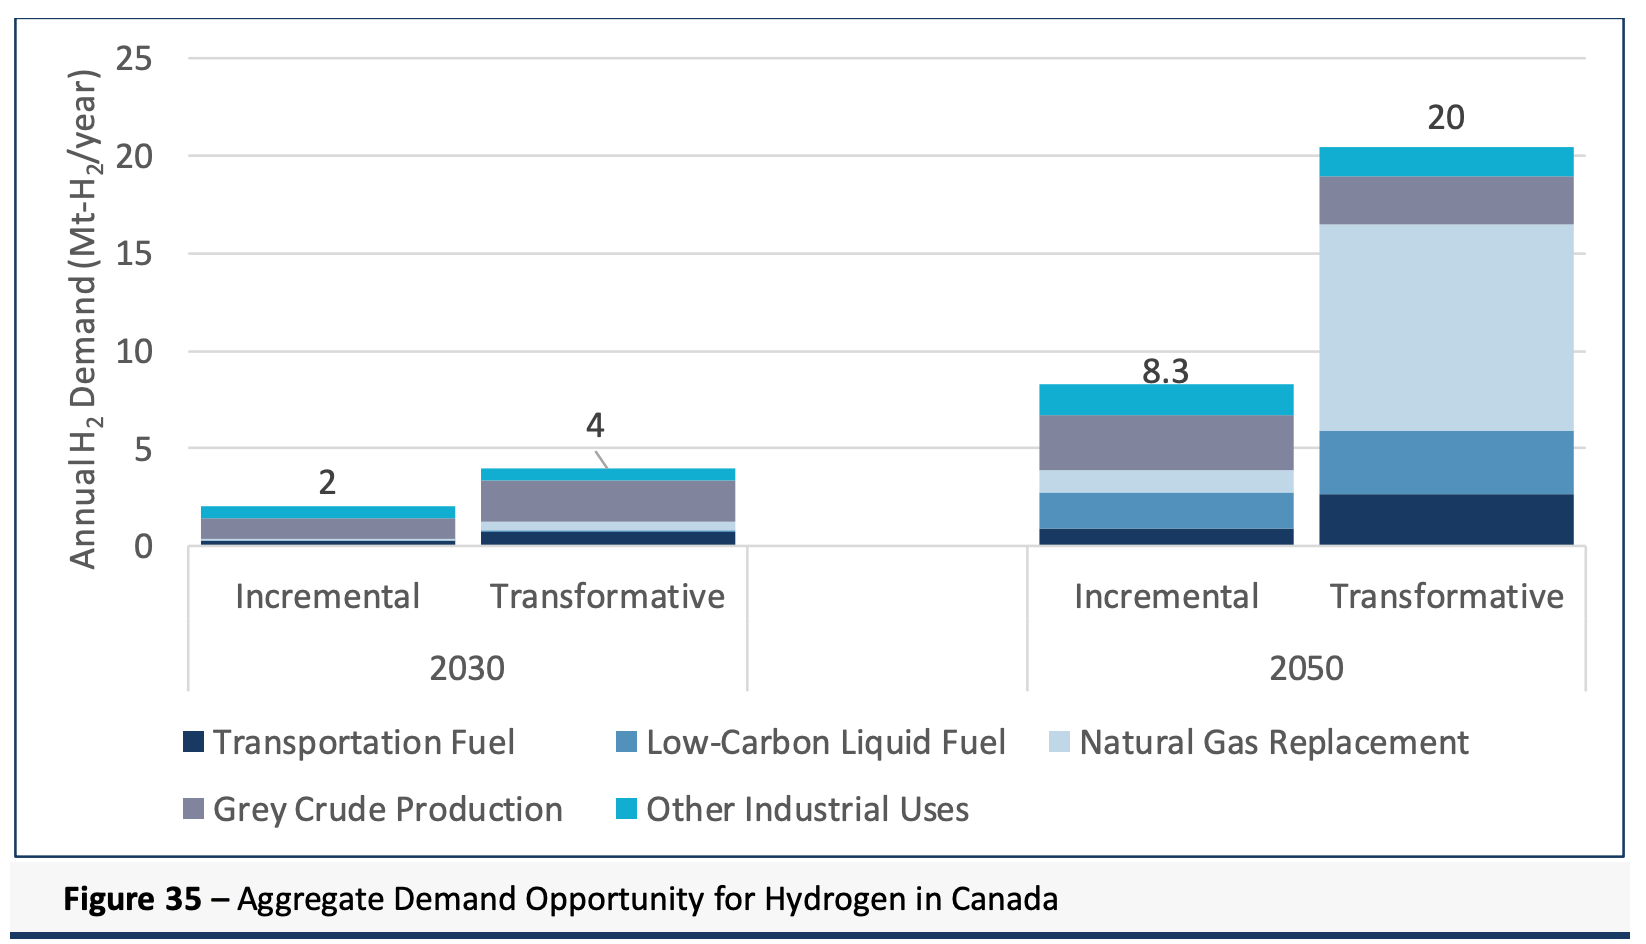 Aggregate demand for hydrogen by segment for Canada from 2020 hydrogen strategy